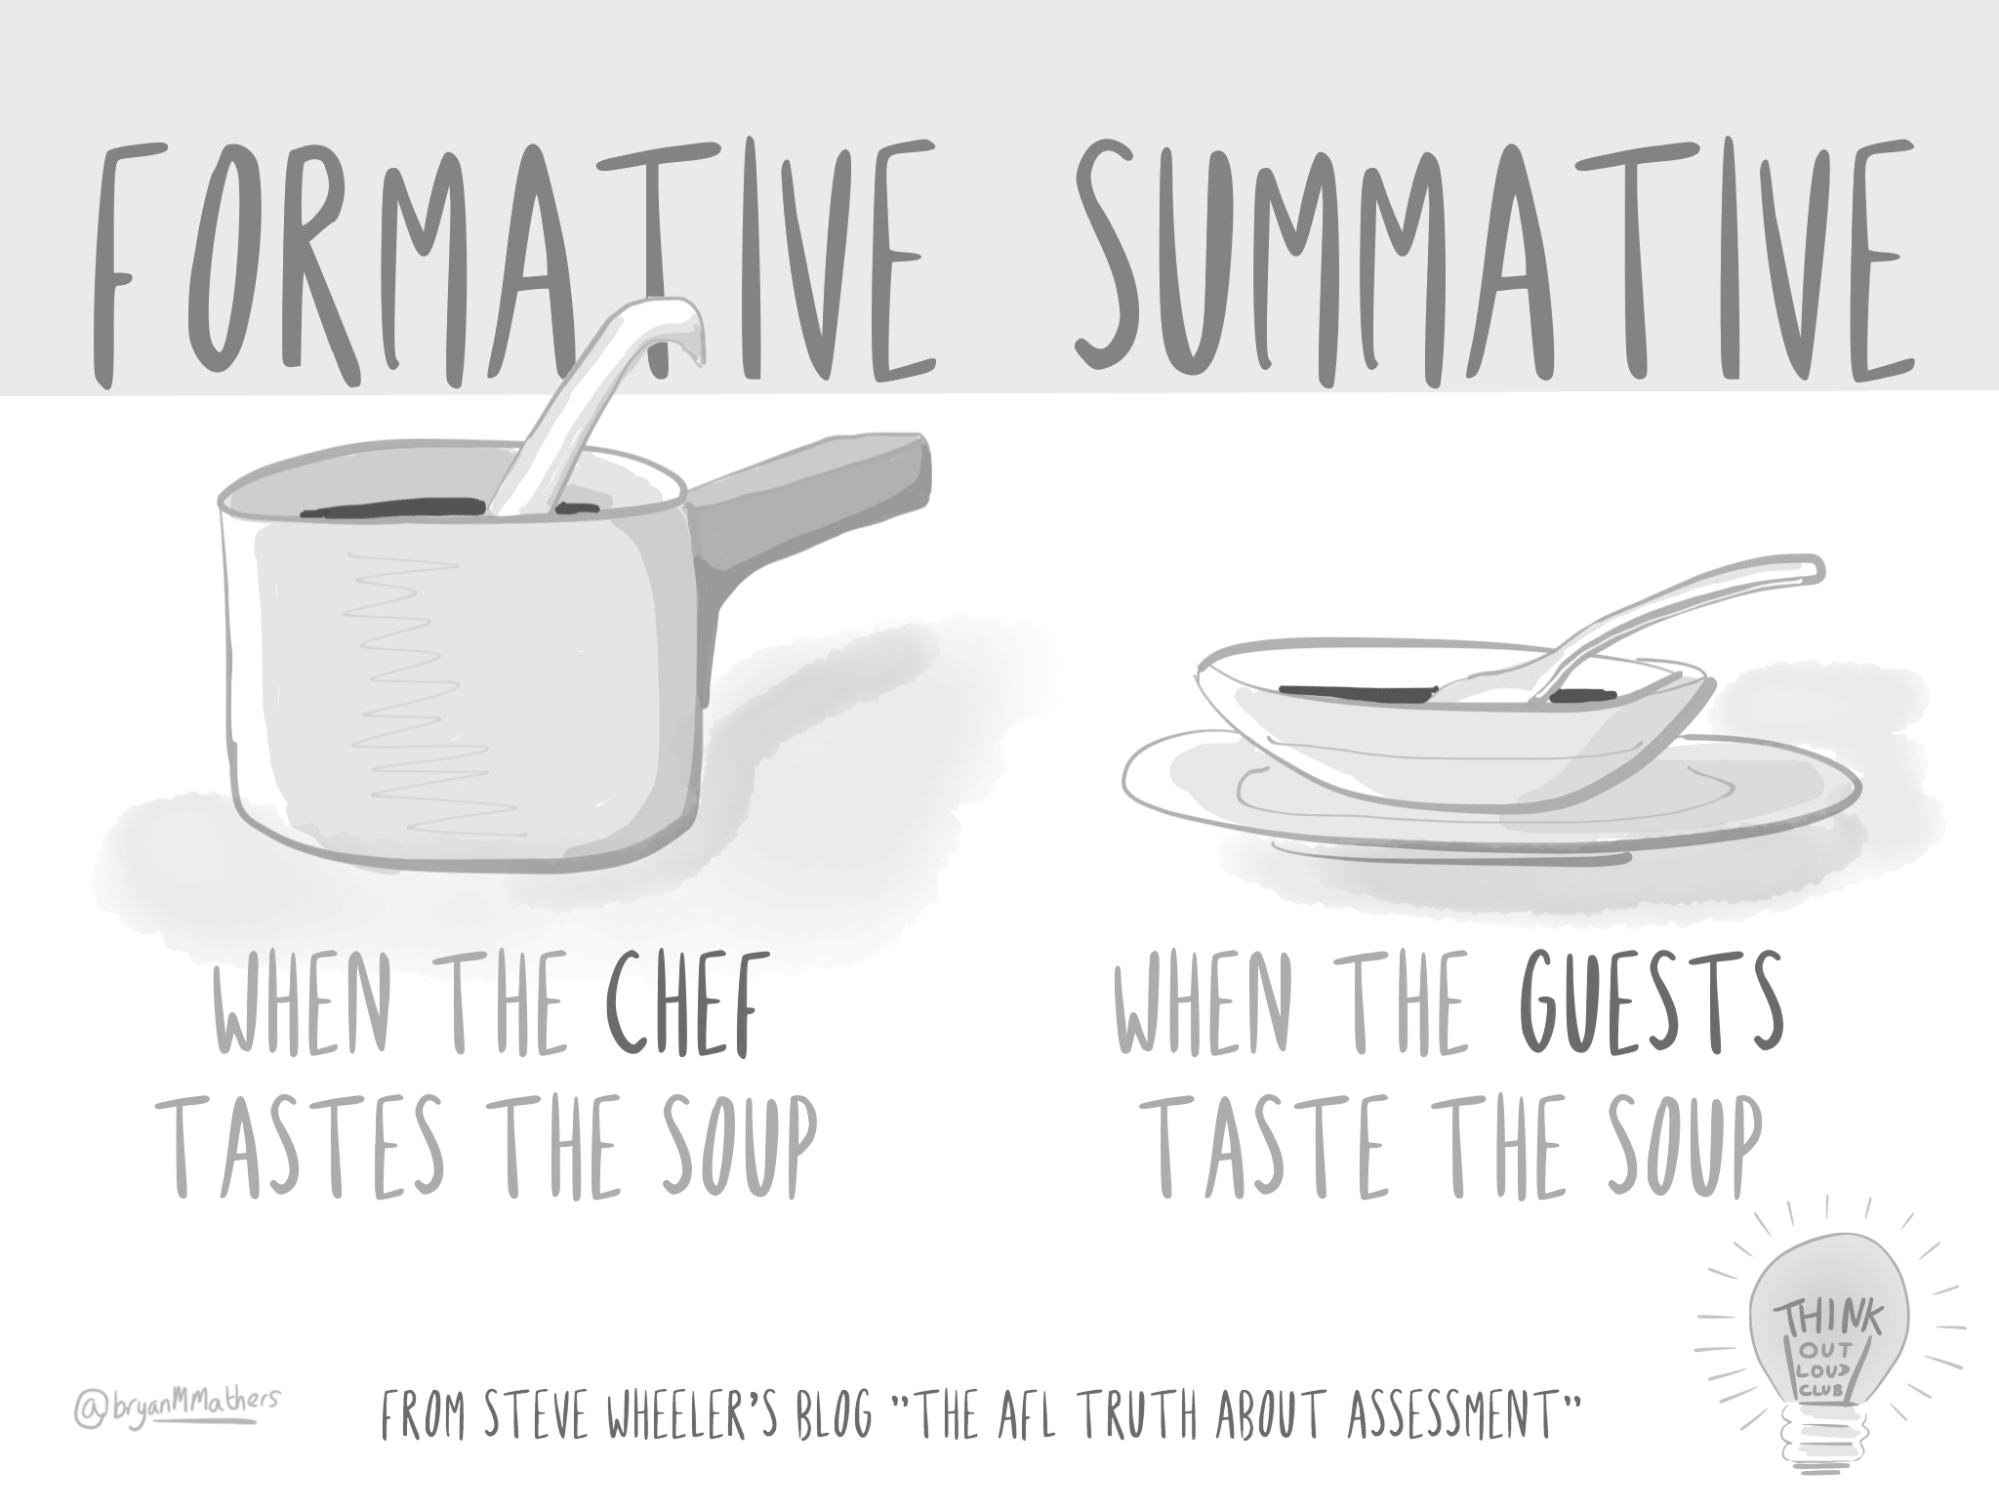 A cartoon figure showing the main difference between formative and summative assessment, when making soup. When the chef tastes the soup while preparing, it's formative assessment. When the guests taste the soup after its done, it's summative asssessment.